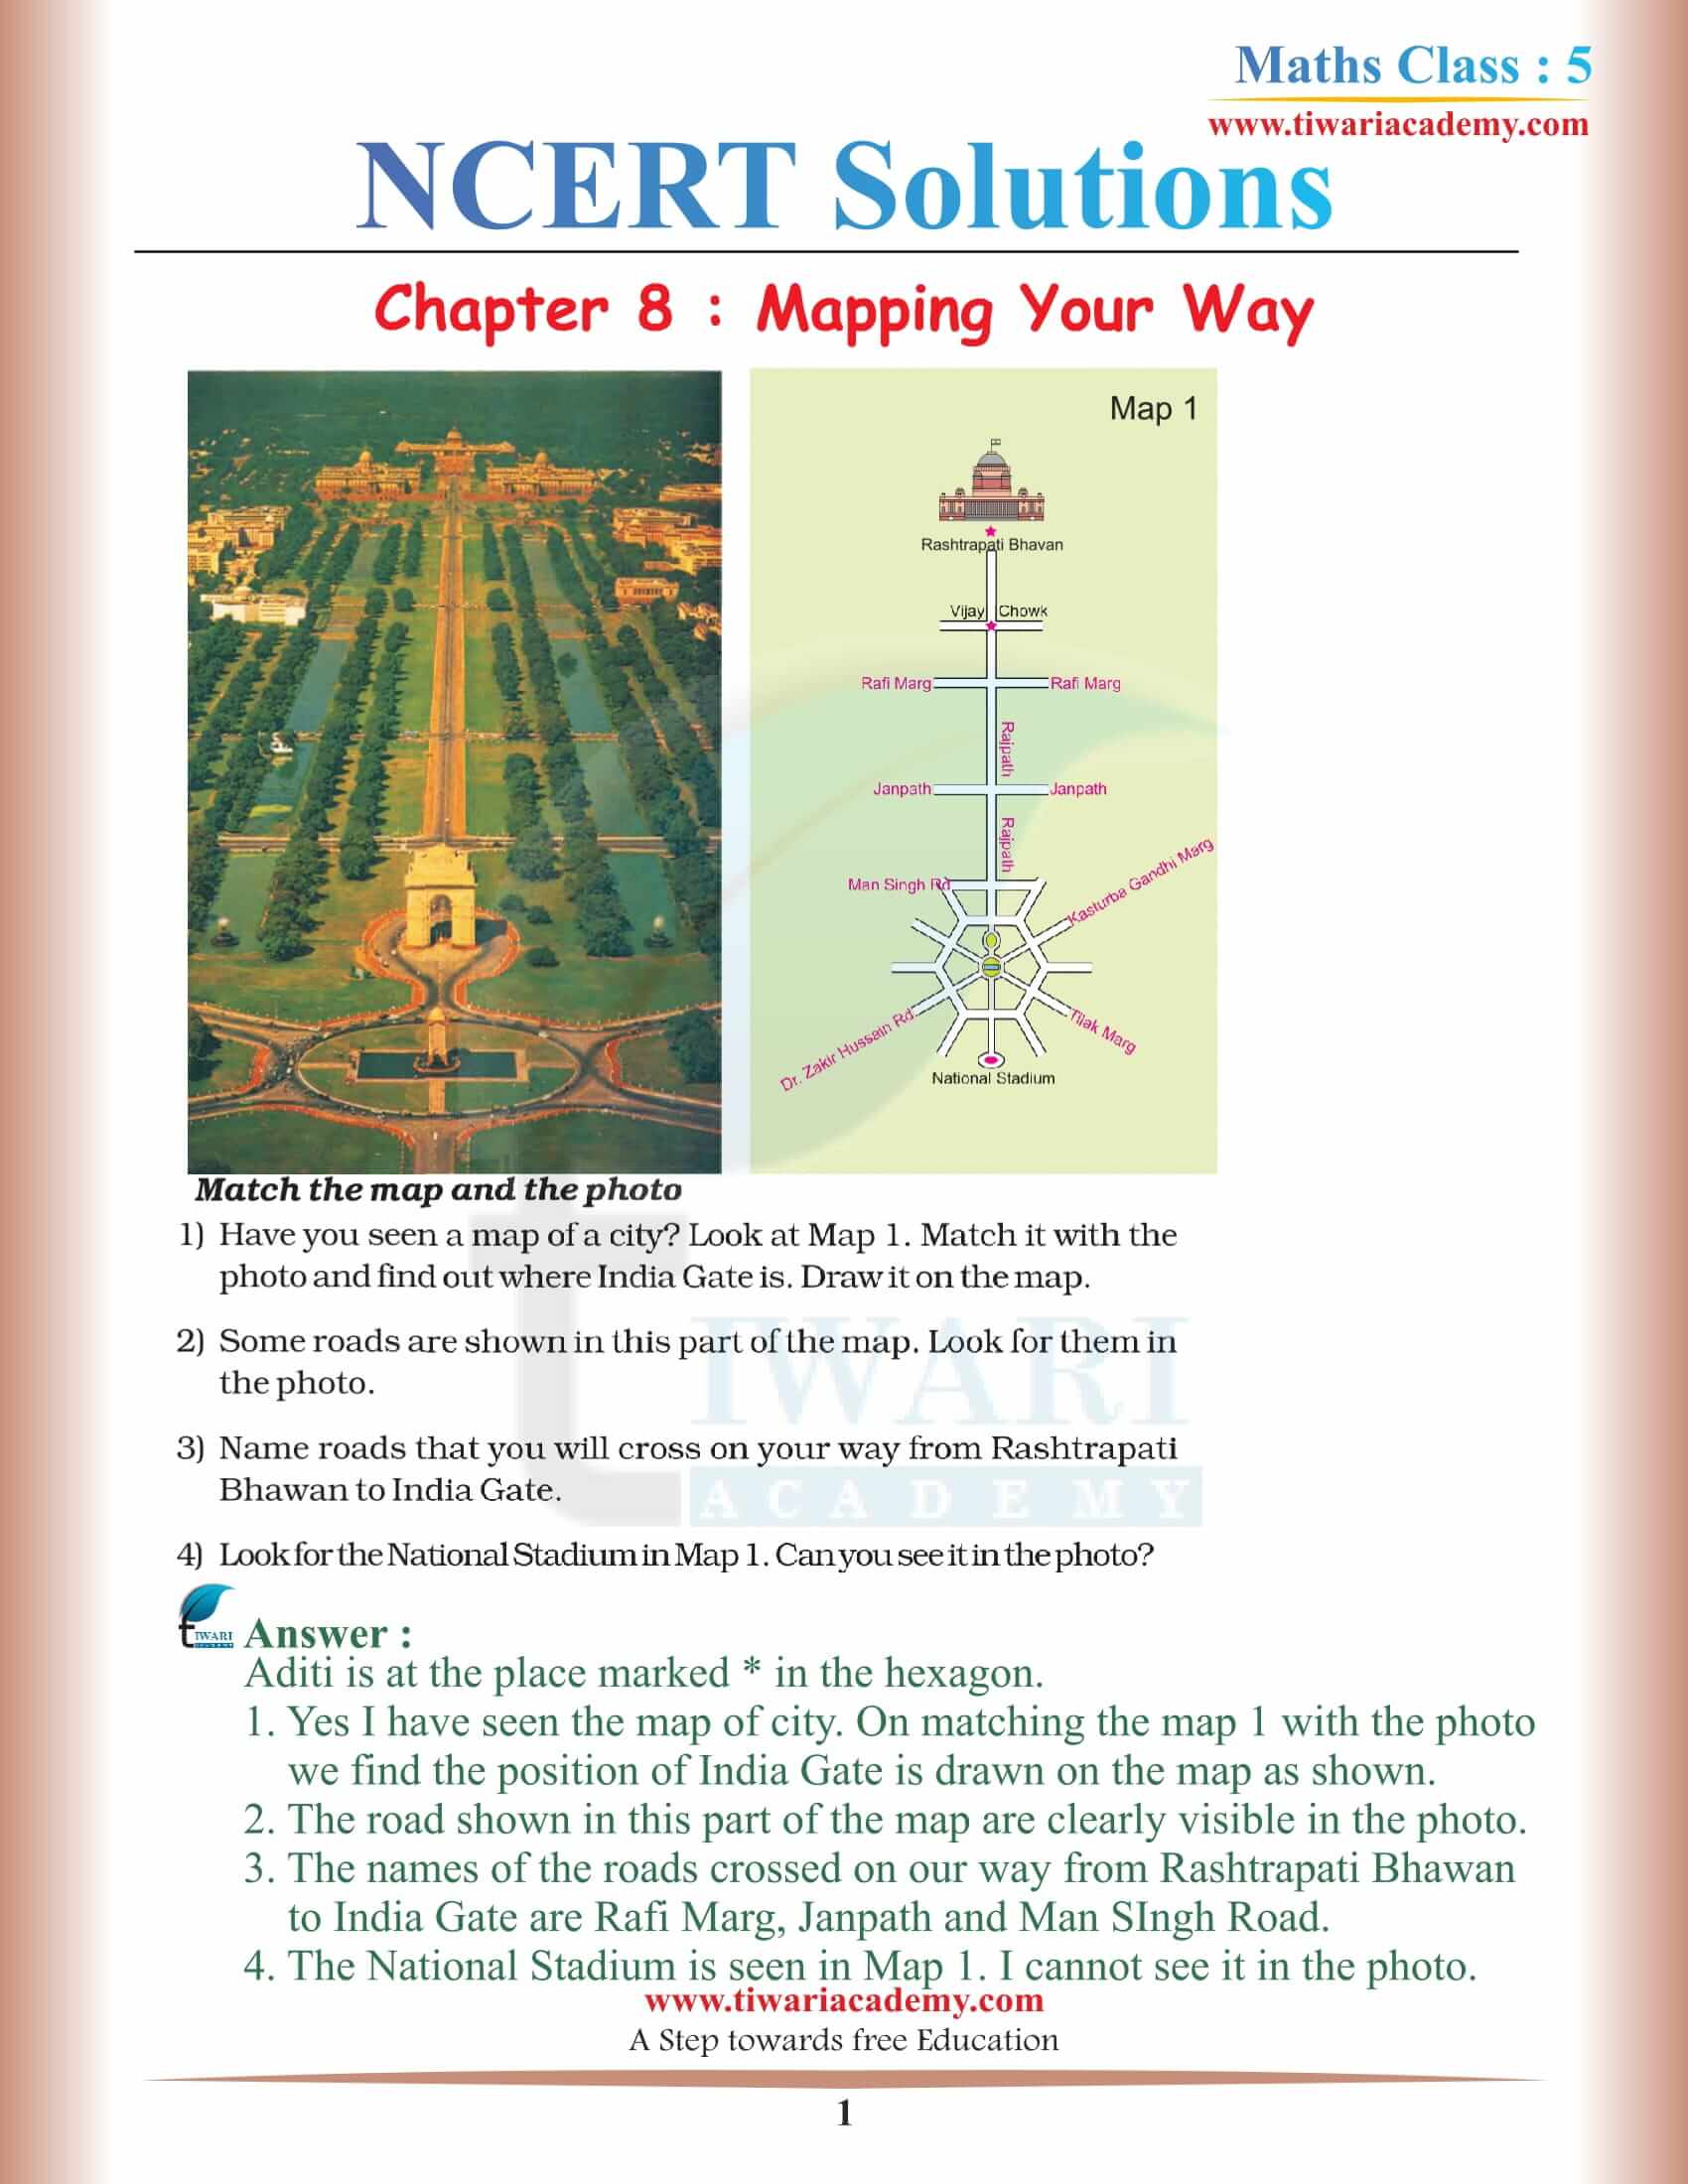 NCERT Solutions for Class 5 Maths Chapter 8 Mapping Your Way